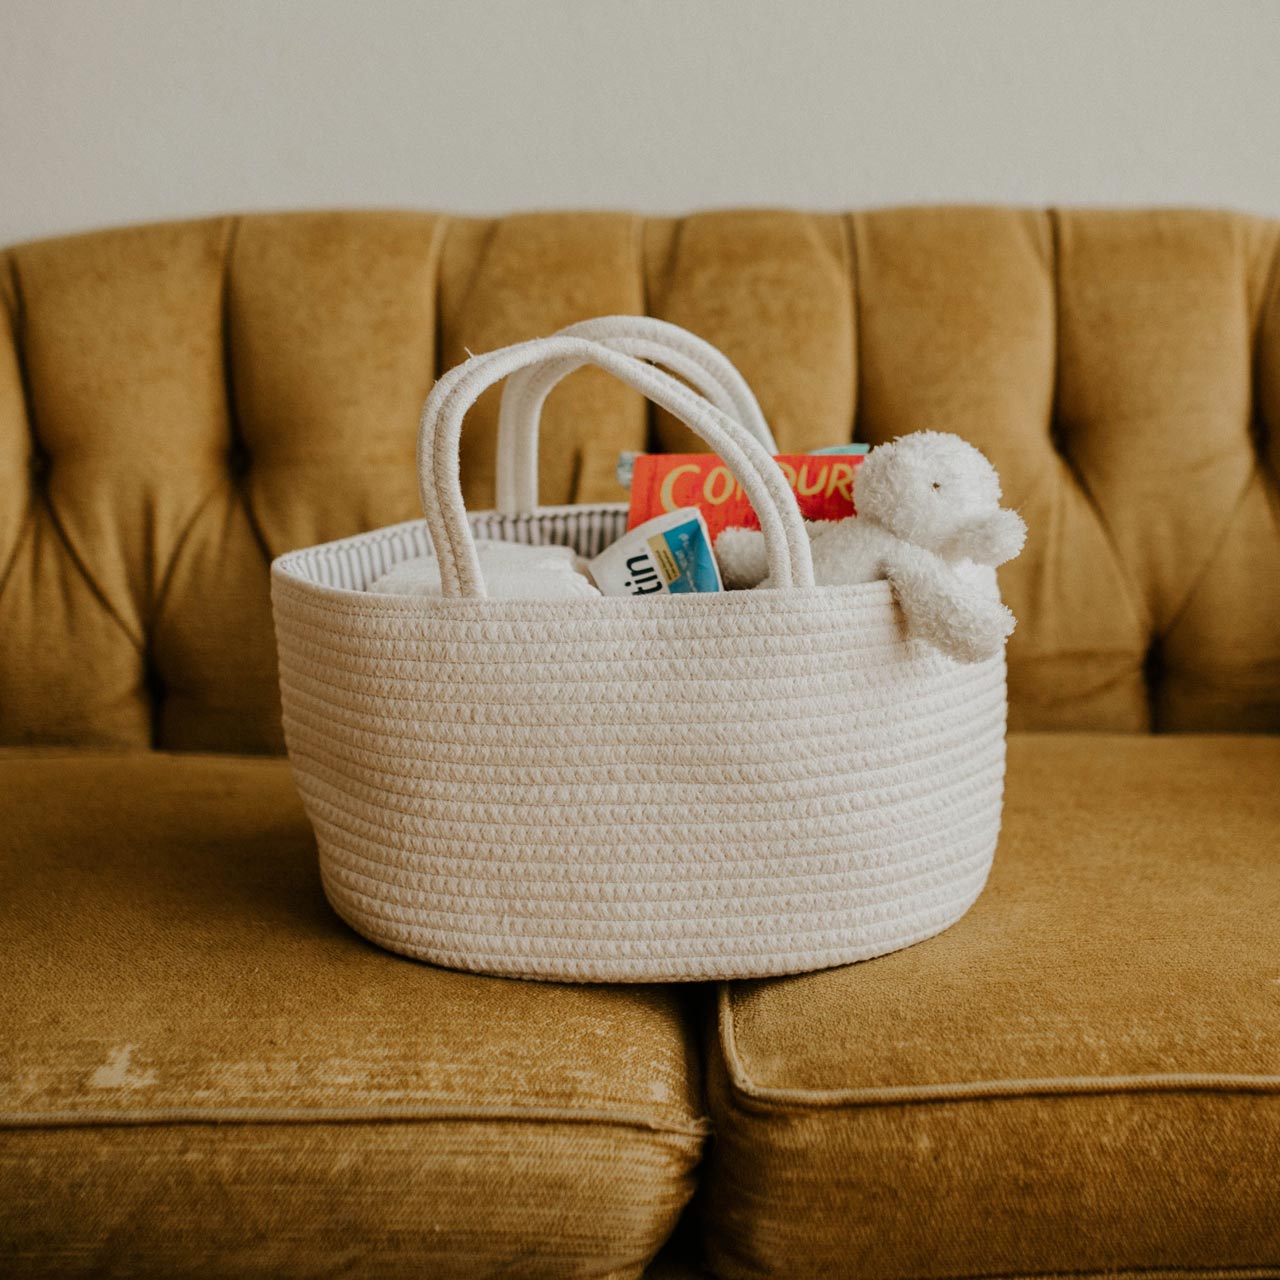 Rope Diaper Caddy with toys